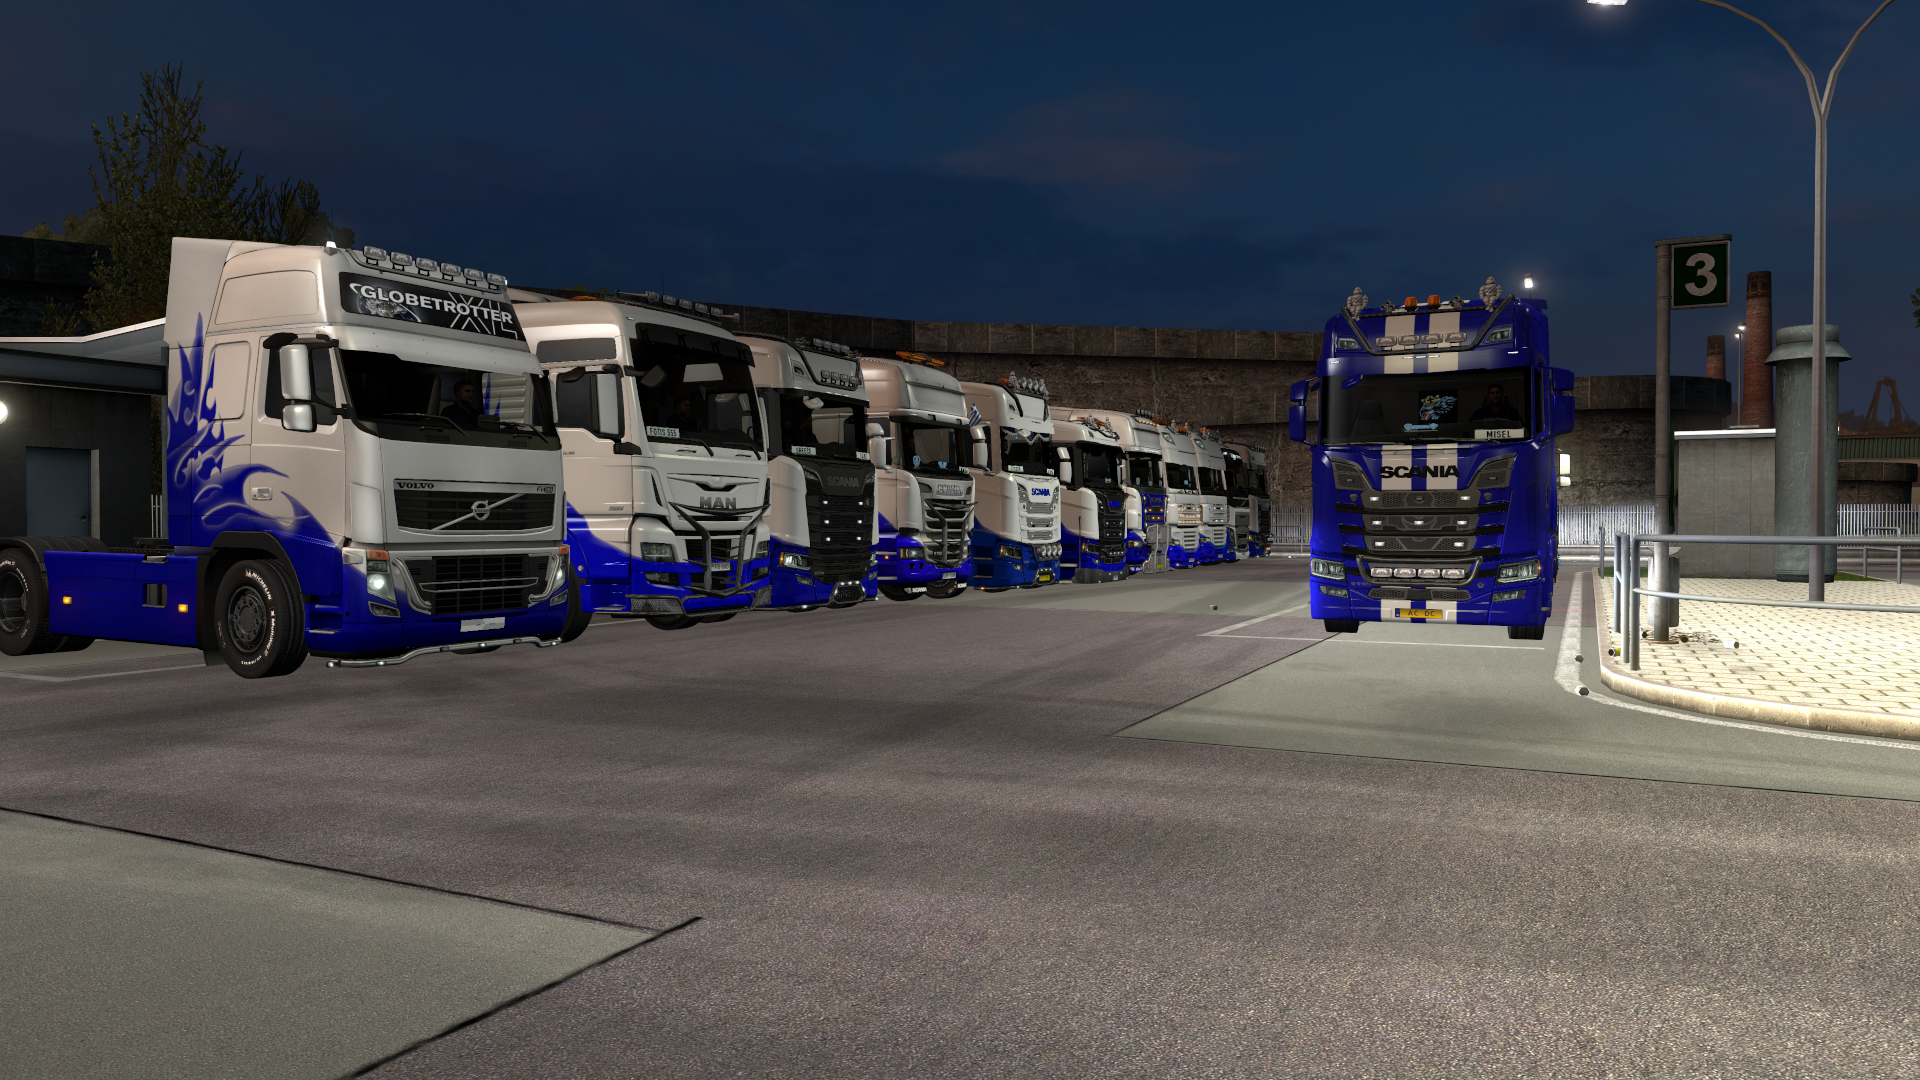 ets2_20200131_233209_00.png